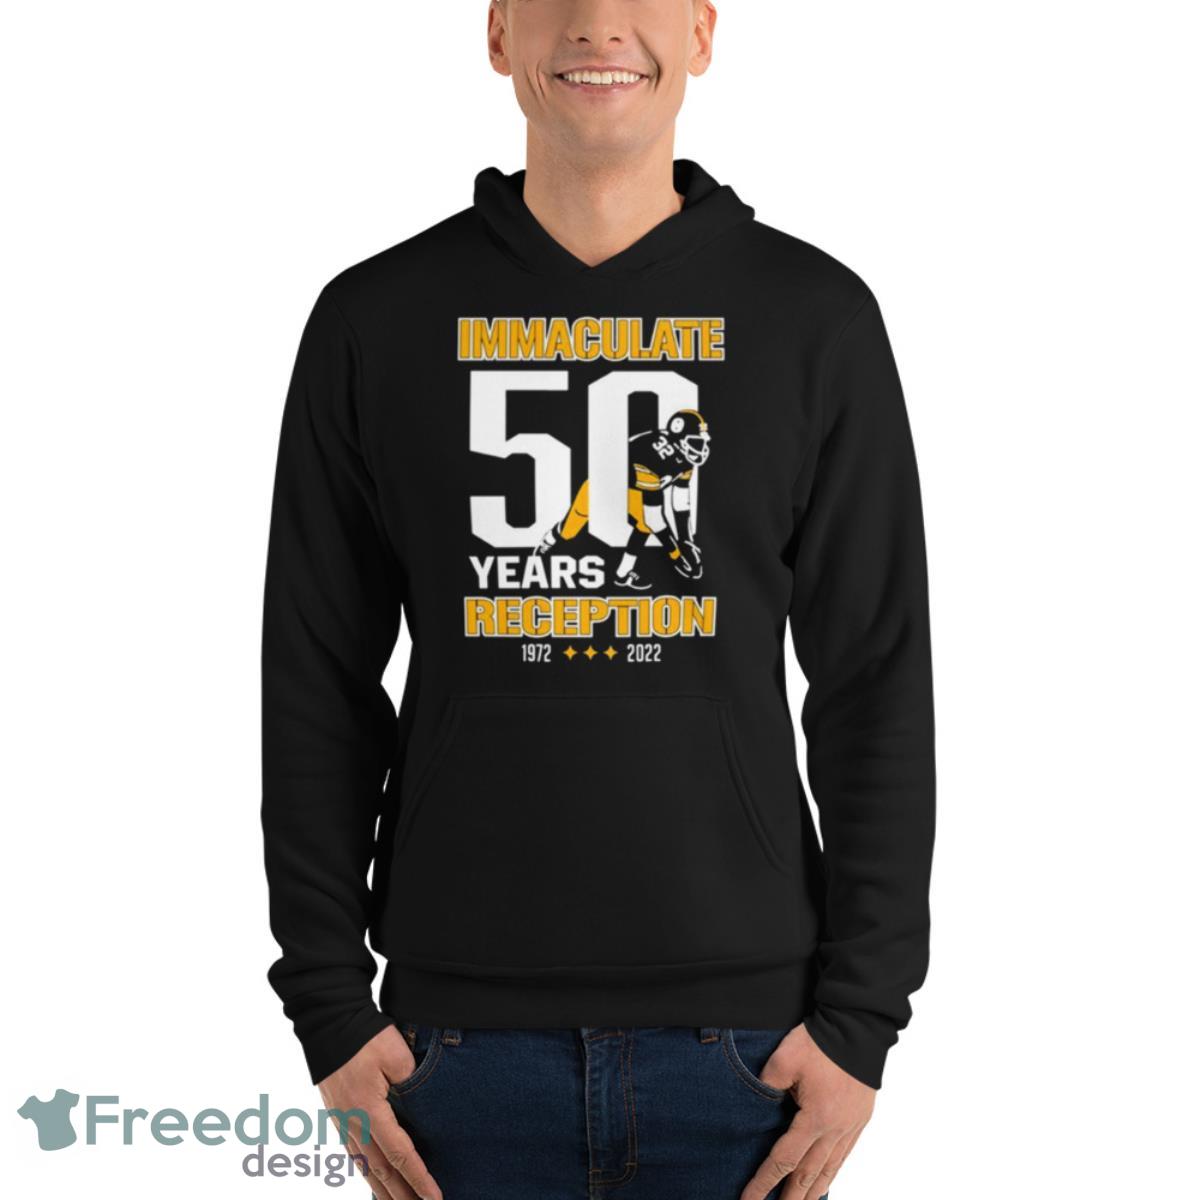 50 Years Immaculate Reception Franco Harris 1972 2022 Shirt